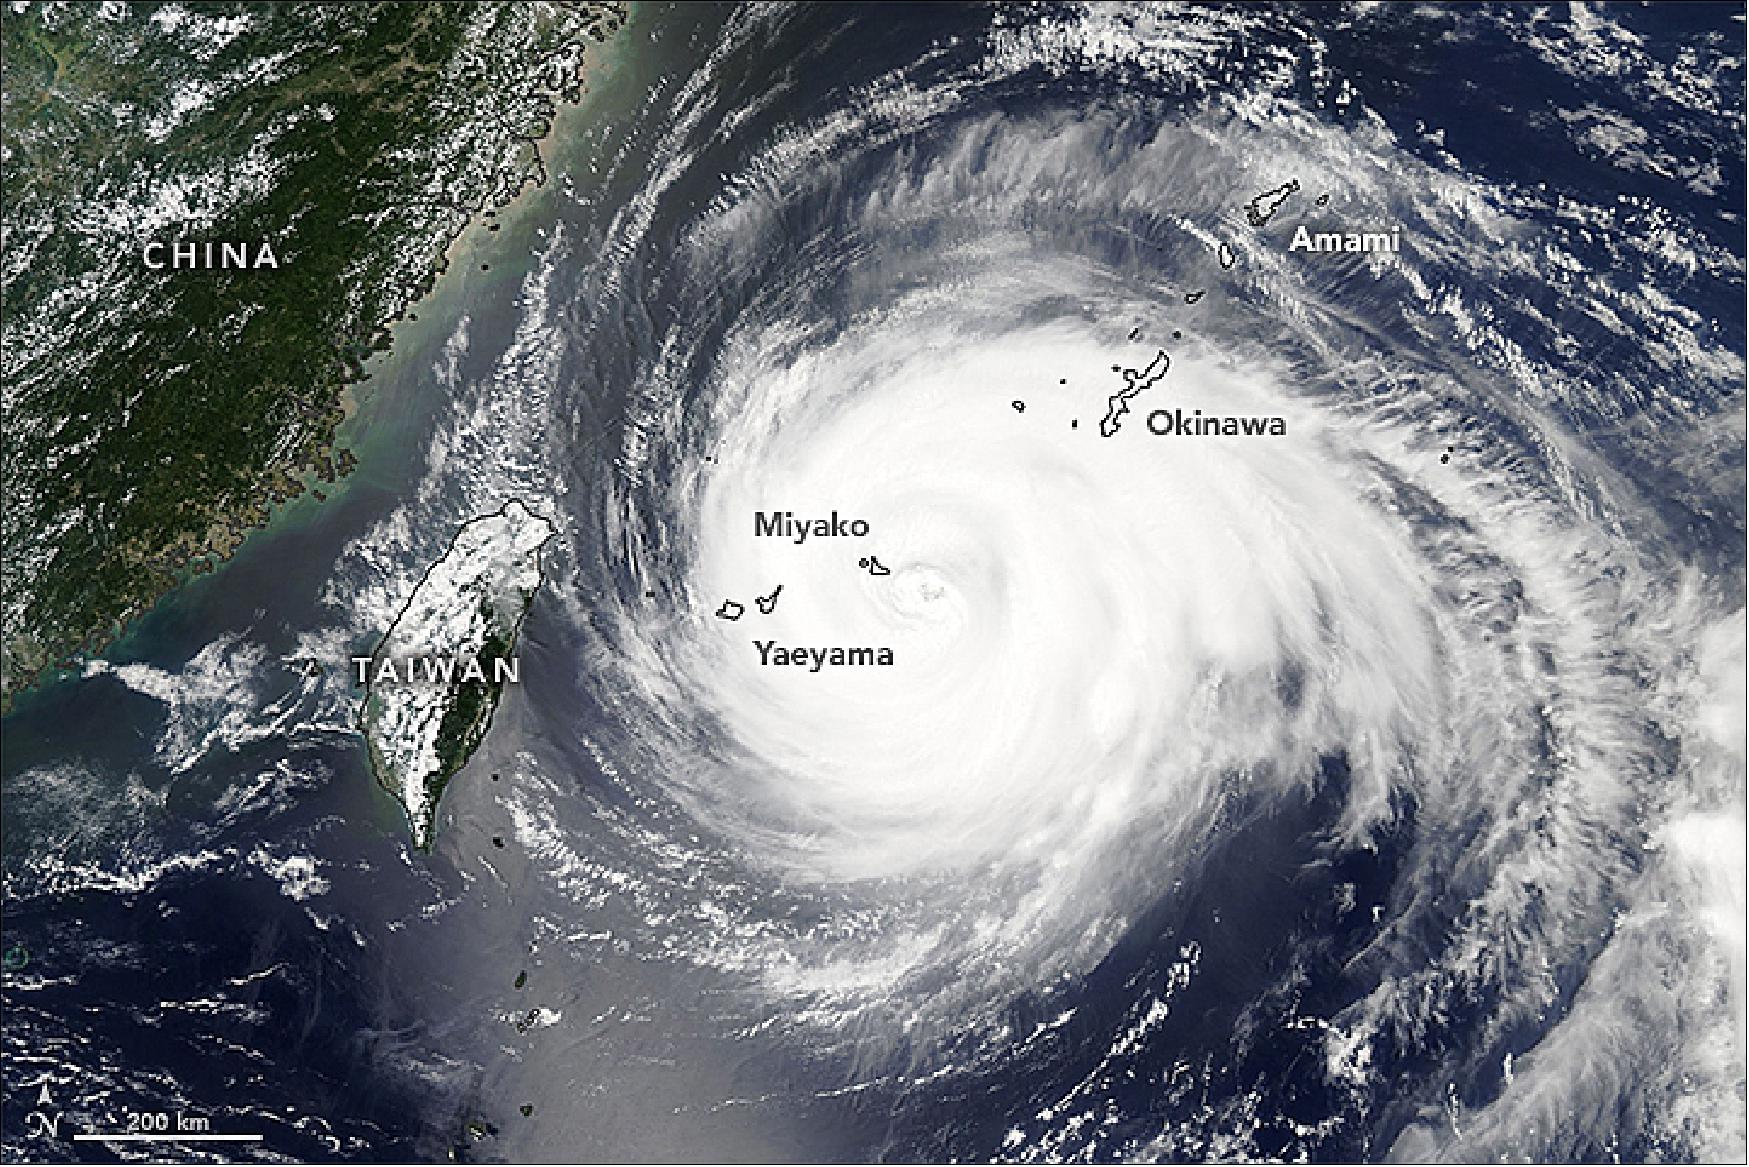 Figure 67: This image of Typhoon Maria was acquired on July 10, 2018, by the MODIS instrument on NASA’s Aqua satellite. The storm already passed by Guam, knocking out power before passing over Japan’s southern Ryukyu Islands. The storm was headed for the northern tip of Taiwan and towards the Fujian and Zhejiang provinces of China (image credit: NASA Earth Observatory image by Lauren Dauphin, using MODIS data from LANCE/EOSDIS Rapid Response, story by Kasha Patel)